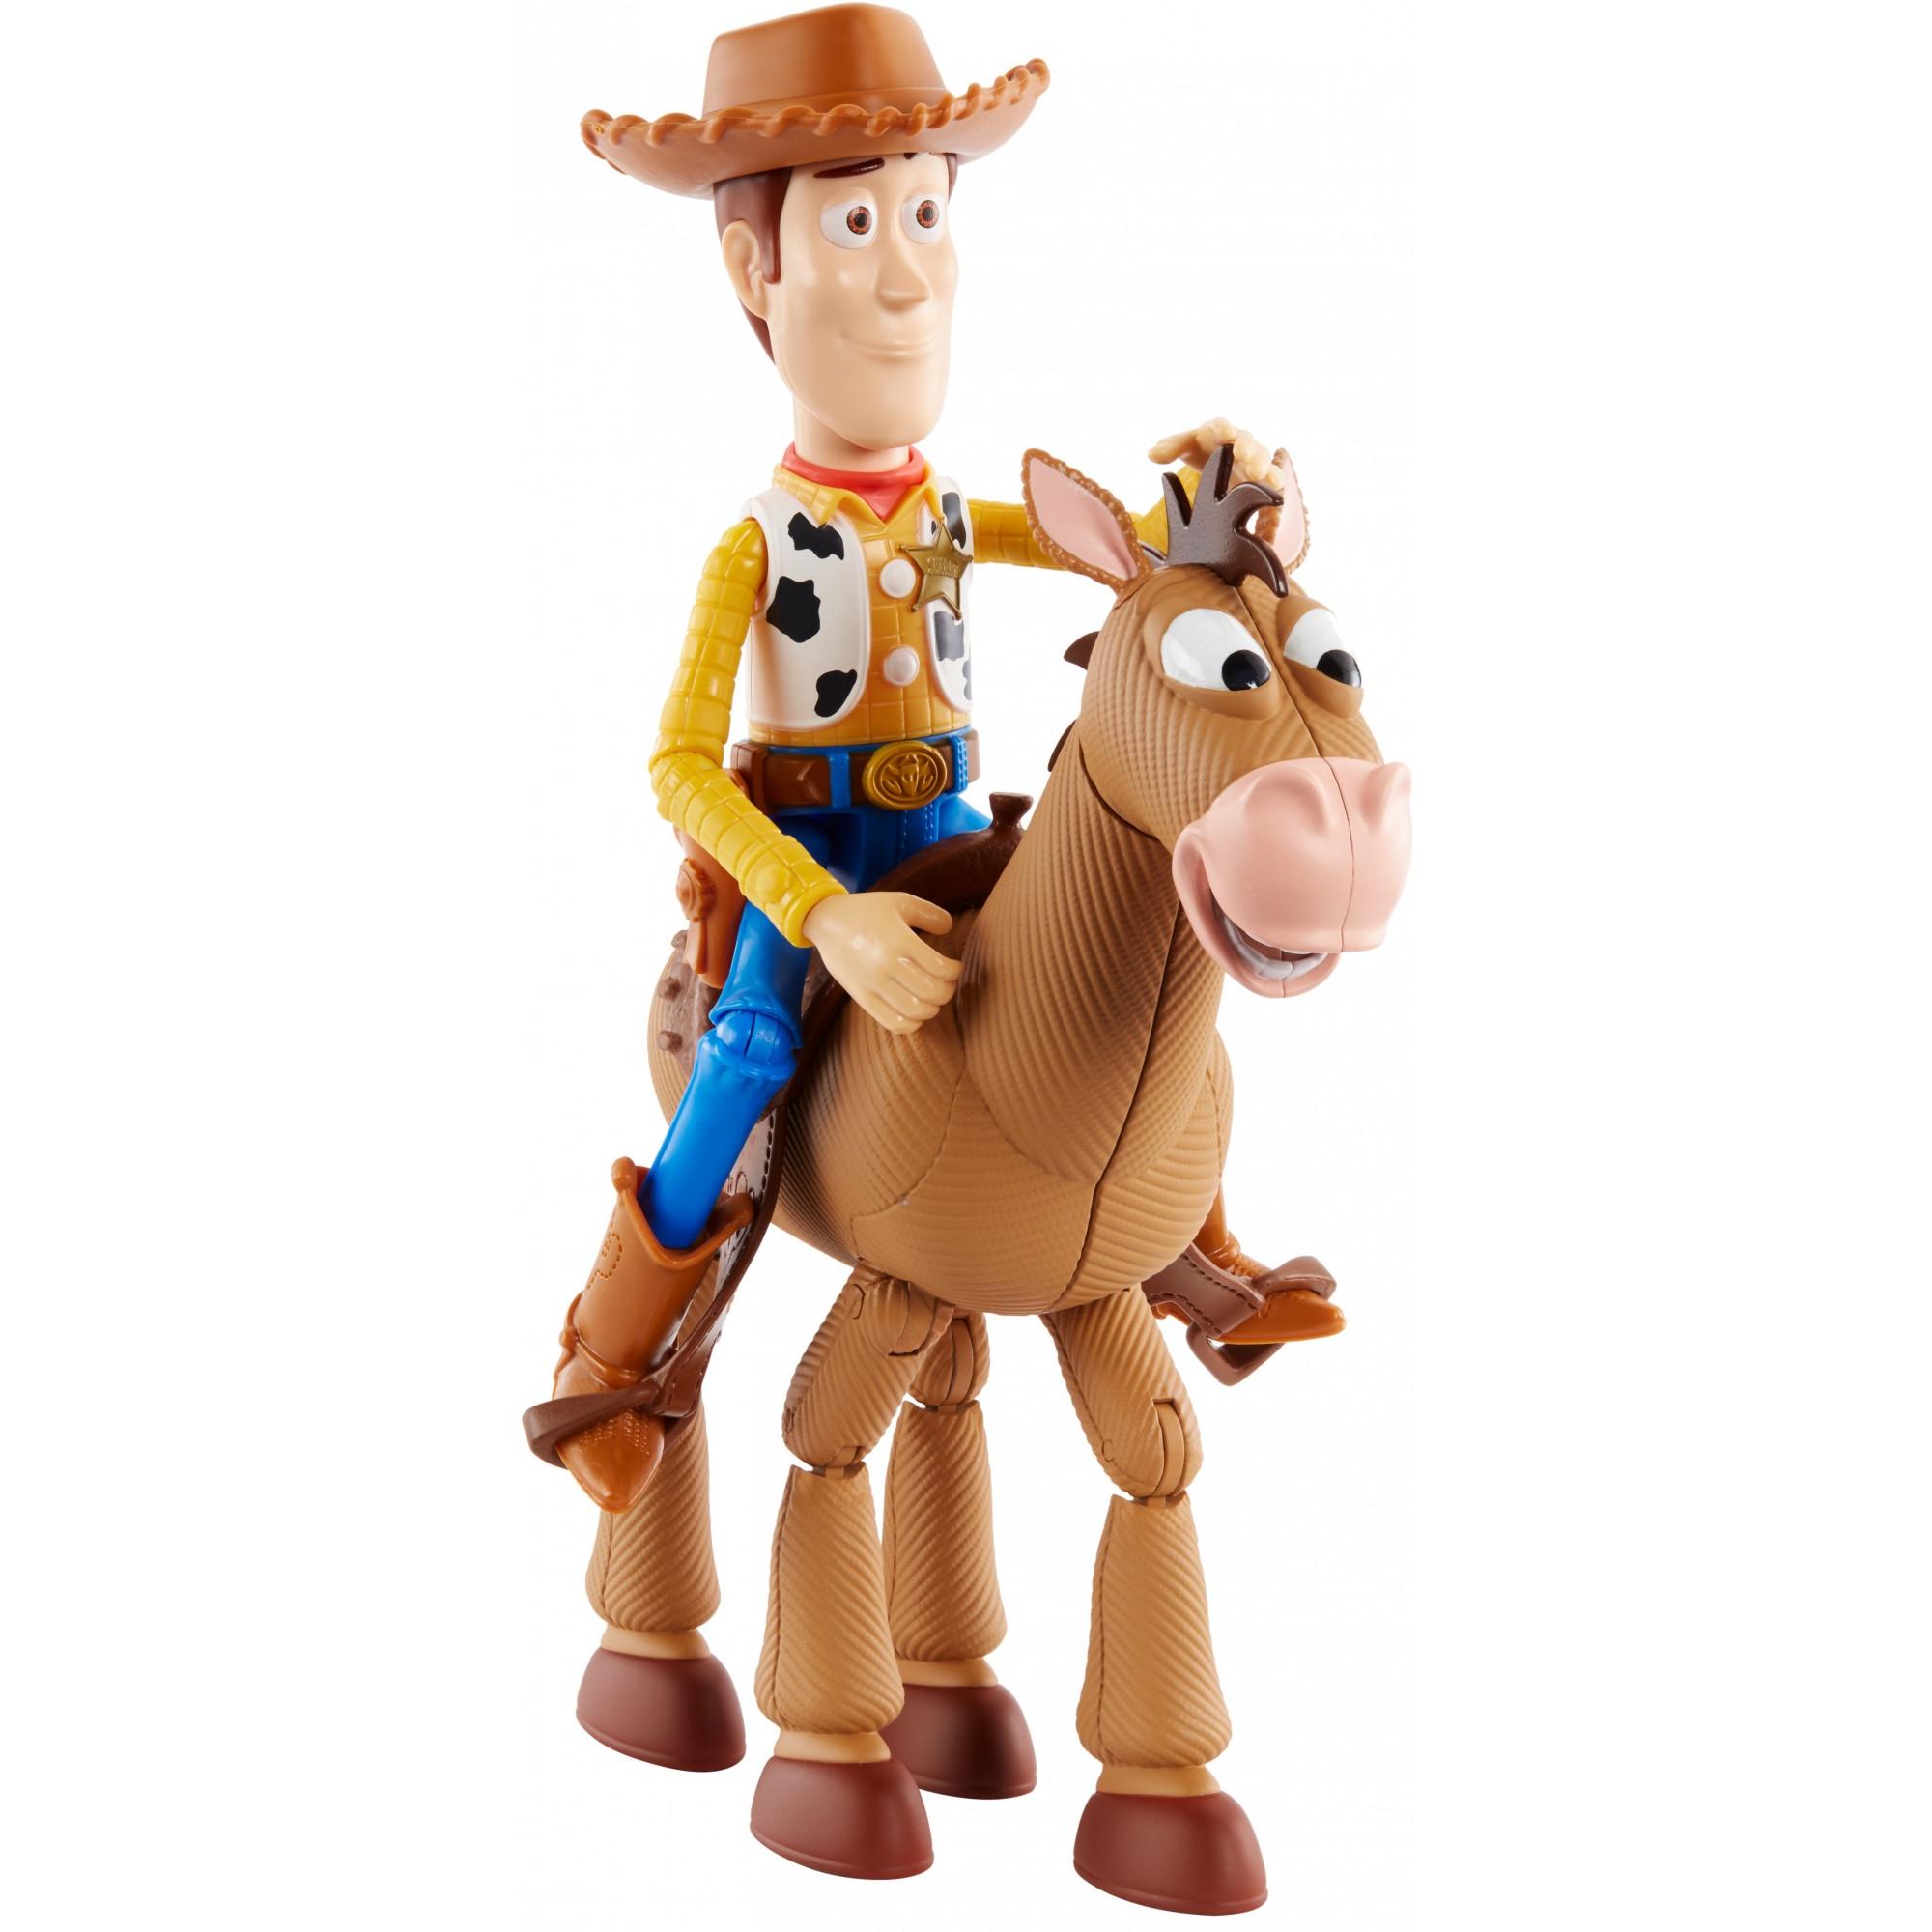 Award Winning Disney/Pixar Toy Story 4 Woody And Buzz Lightyear 2-Character Pack, Movie-Inspired Relative-Scale For Storytelling Play - image 6 of 8